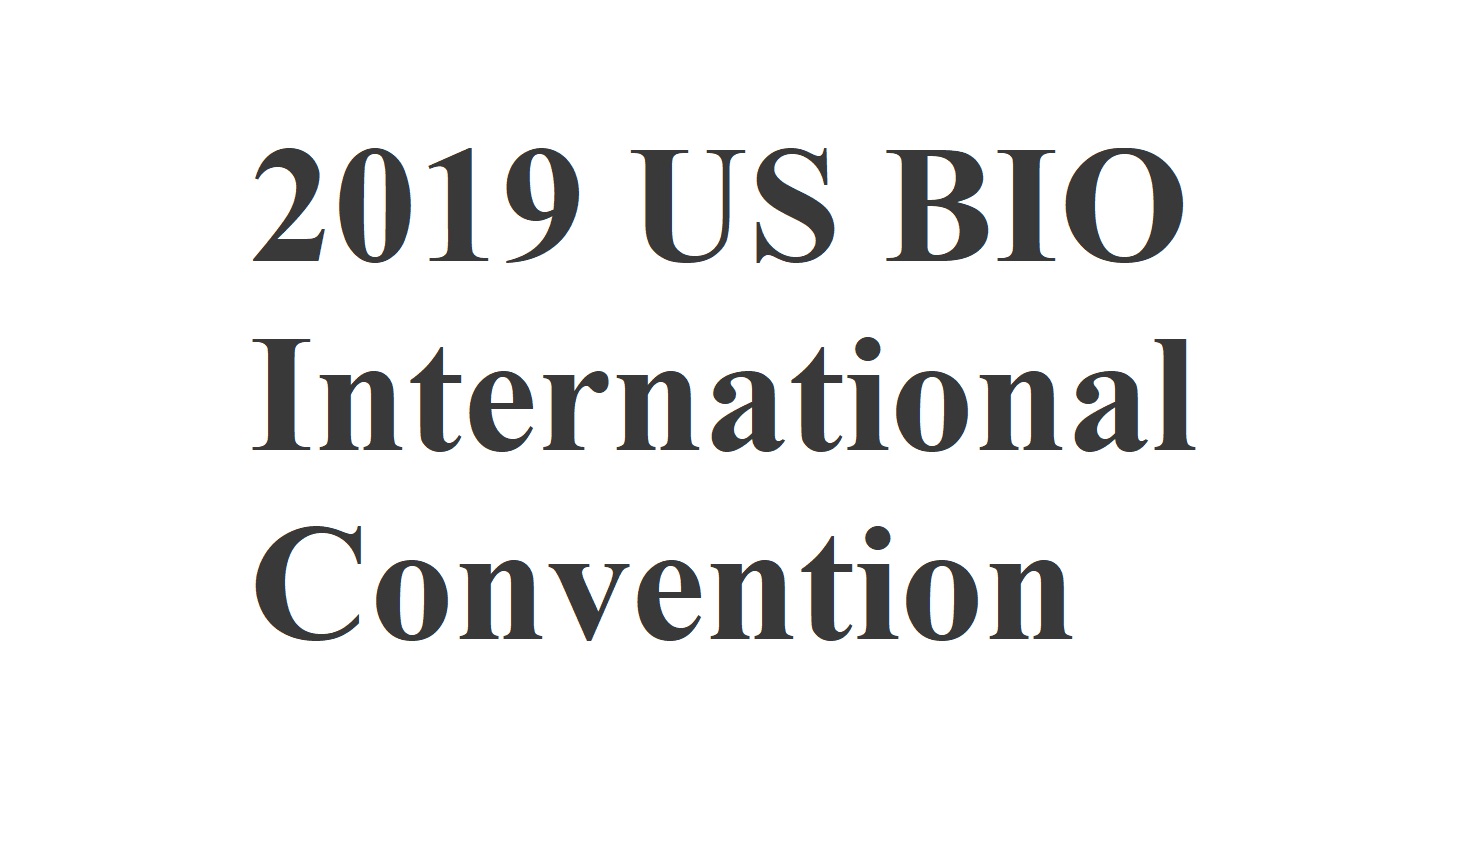 Taiwan, ready to showcase her biomedical industry to the world in 2019 US BIO International Convention